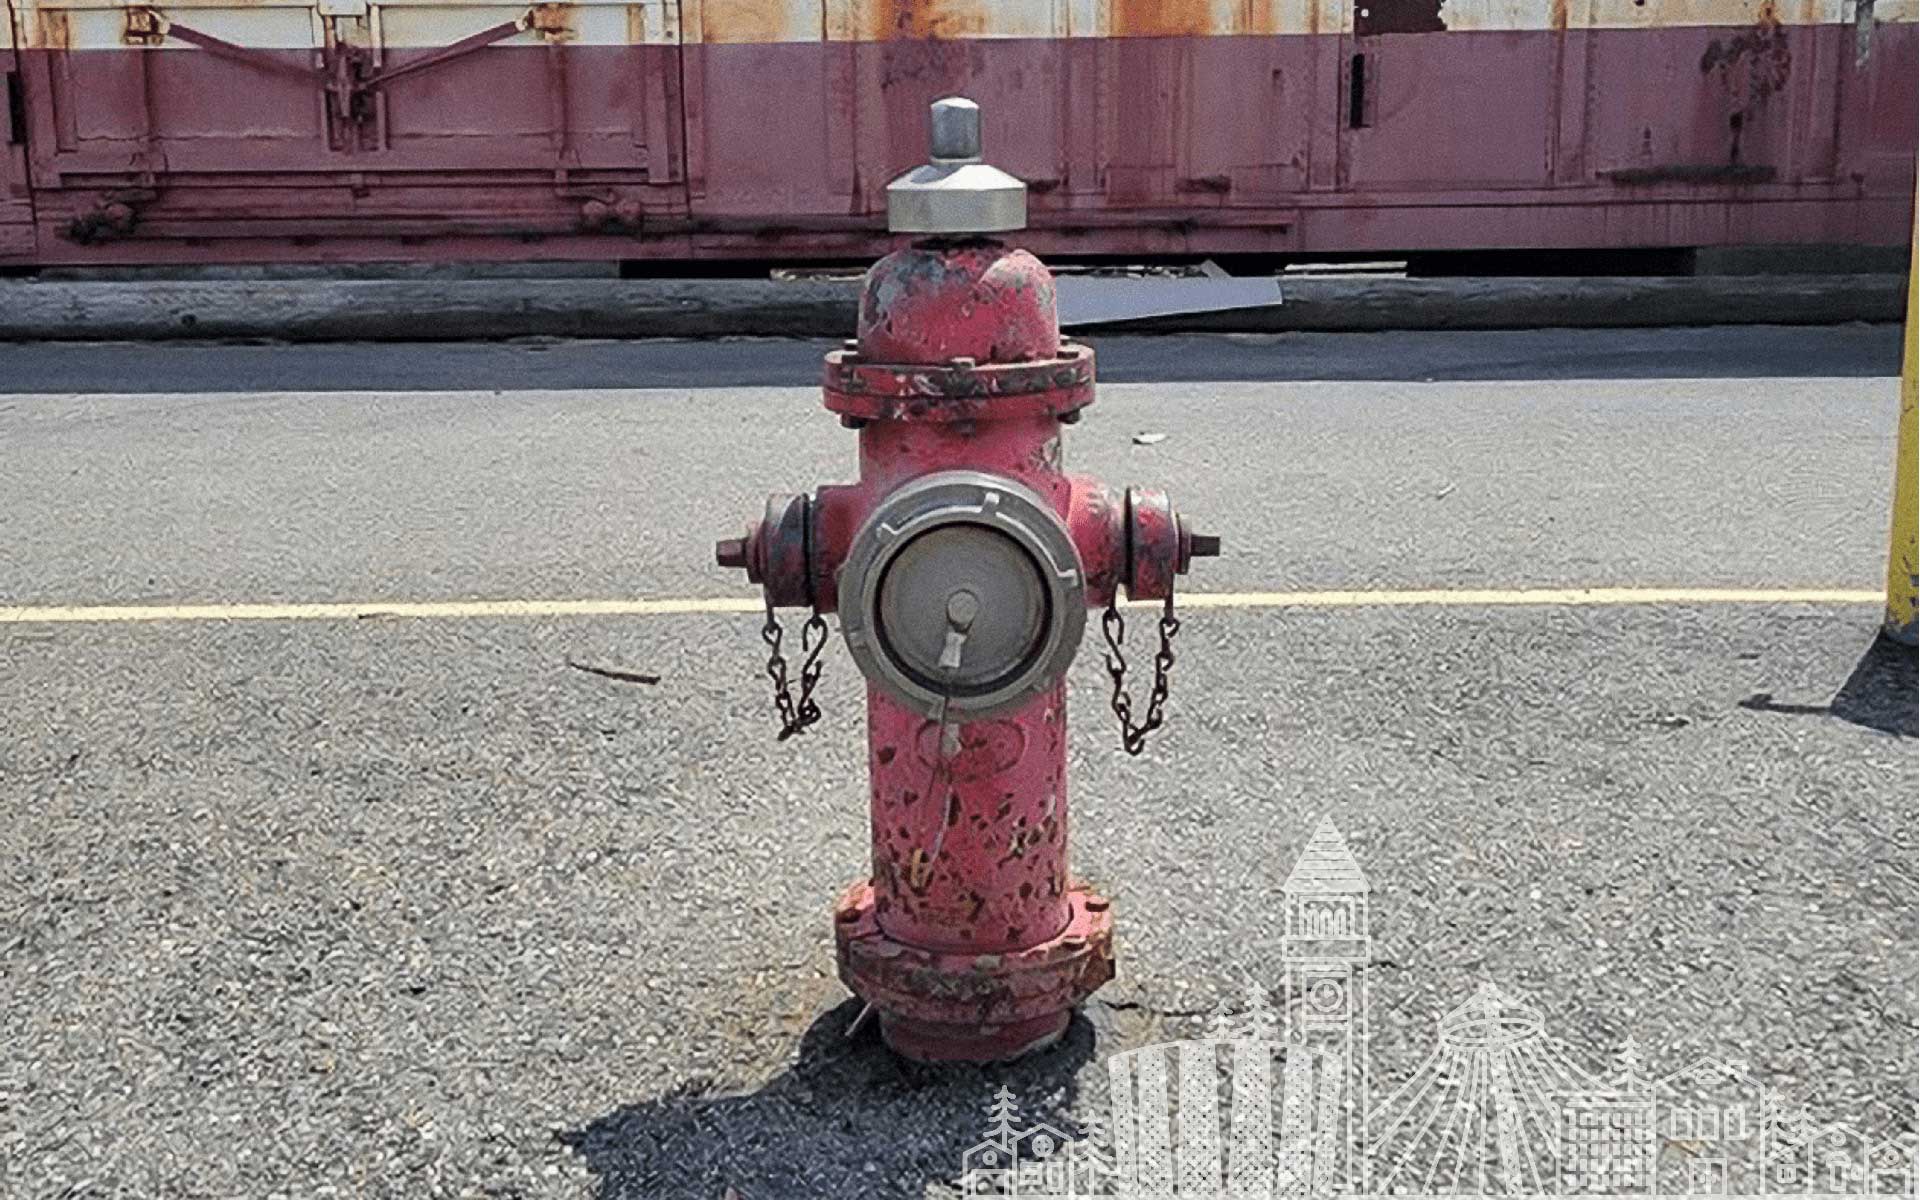 city-launches-hydrant-lock-program-for-water-system-protection-city